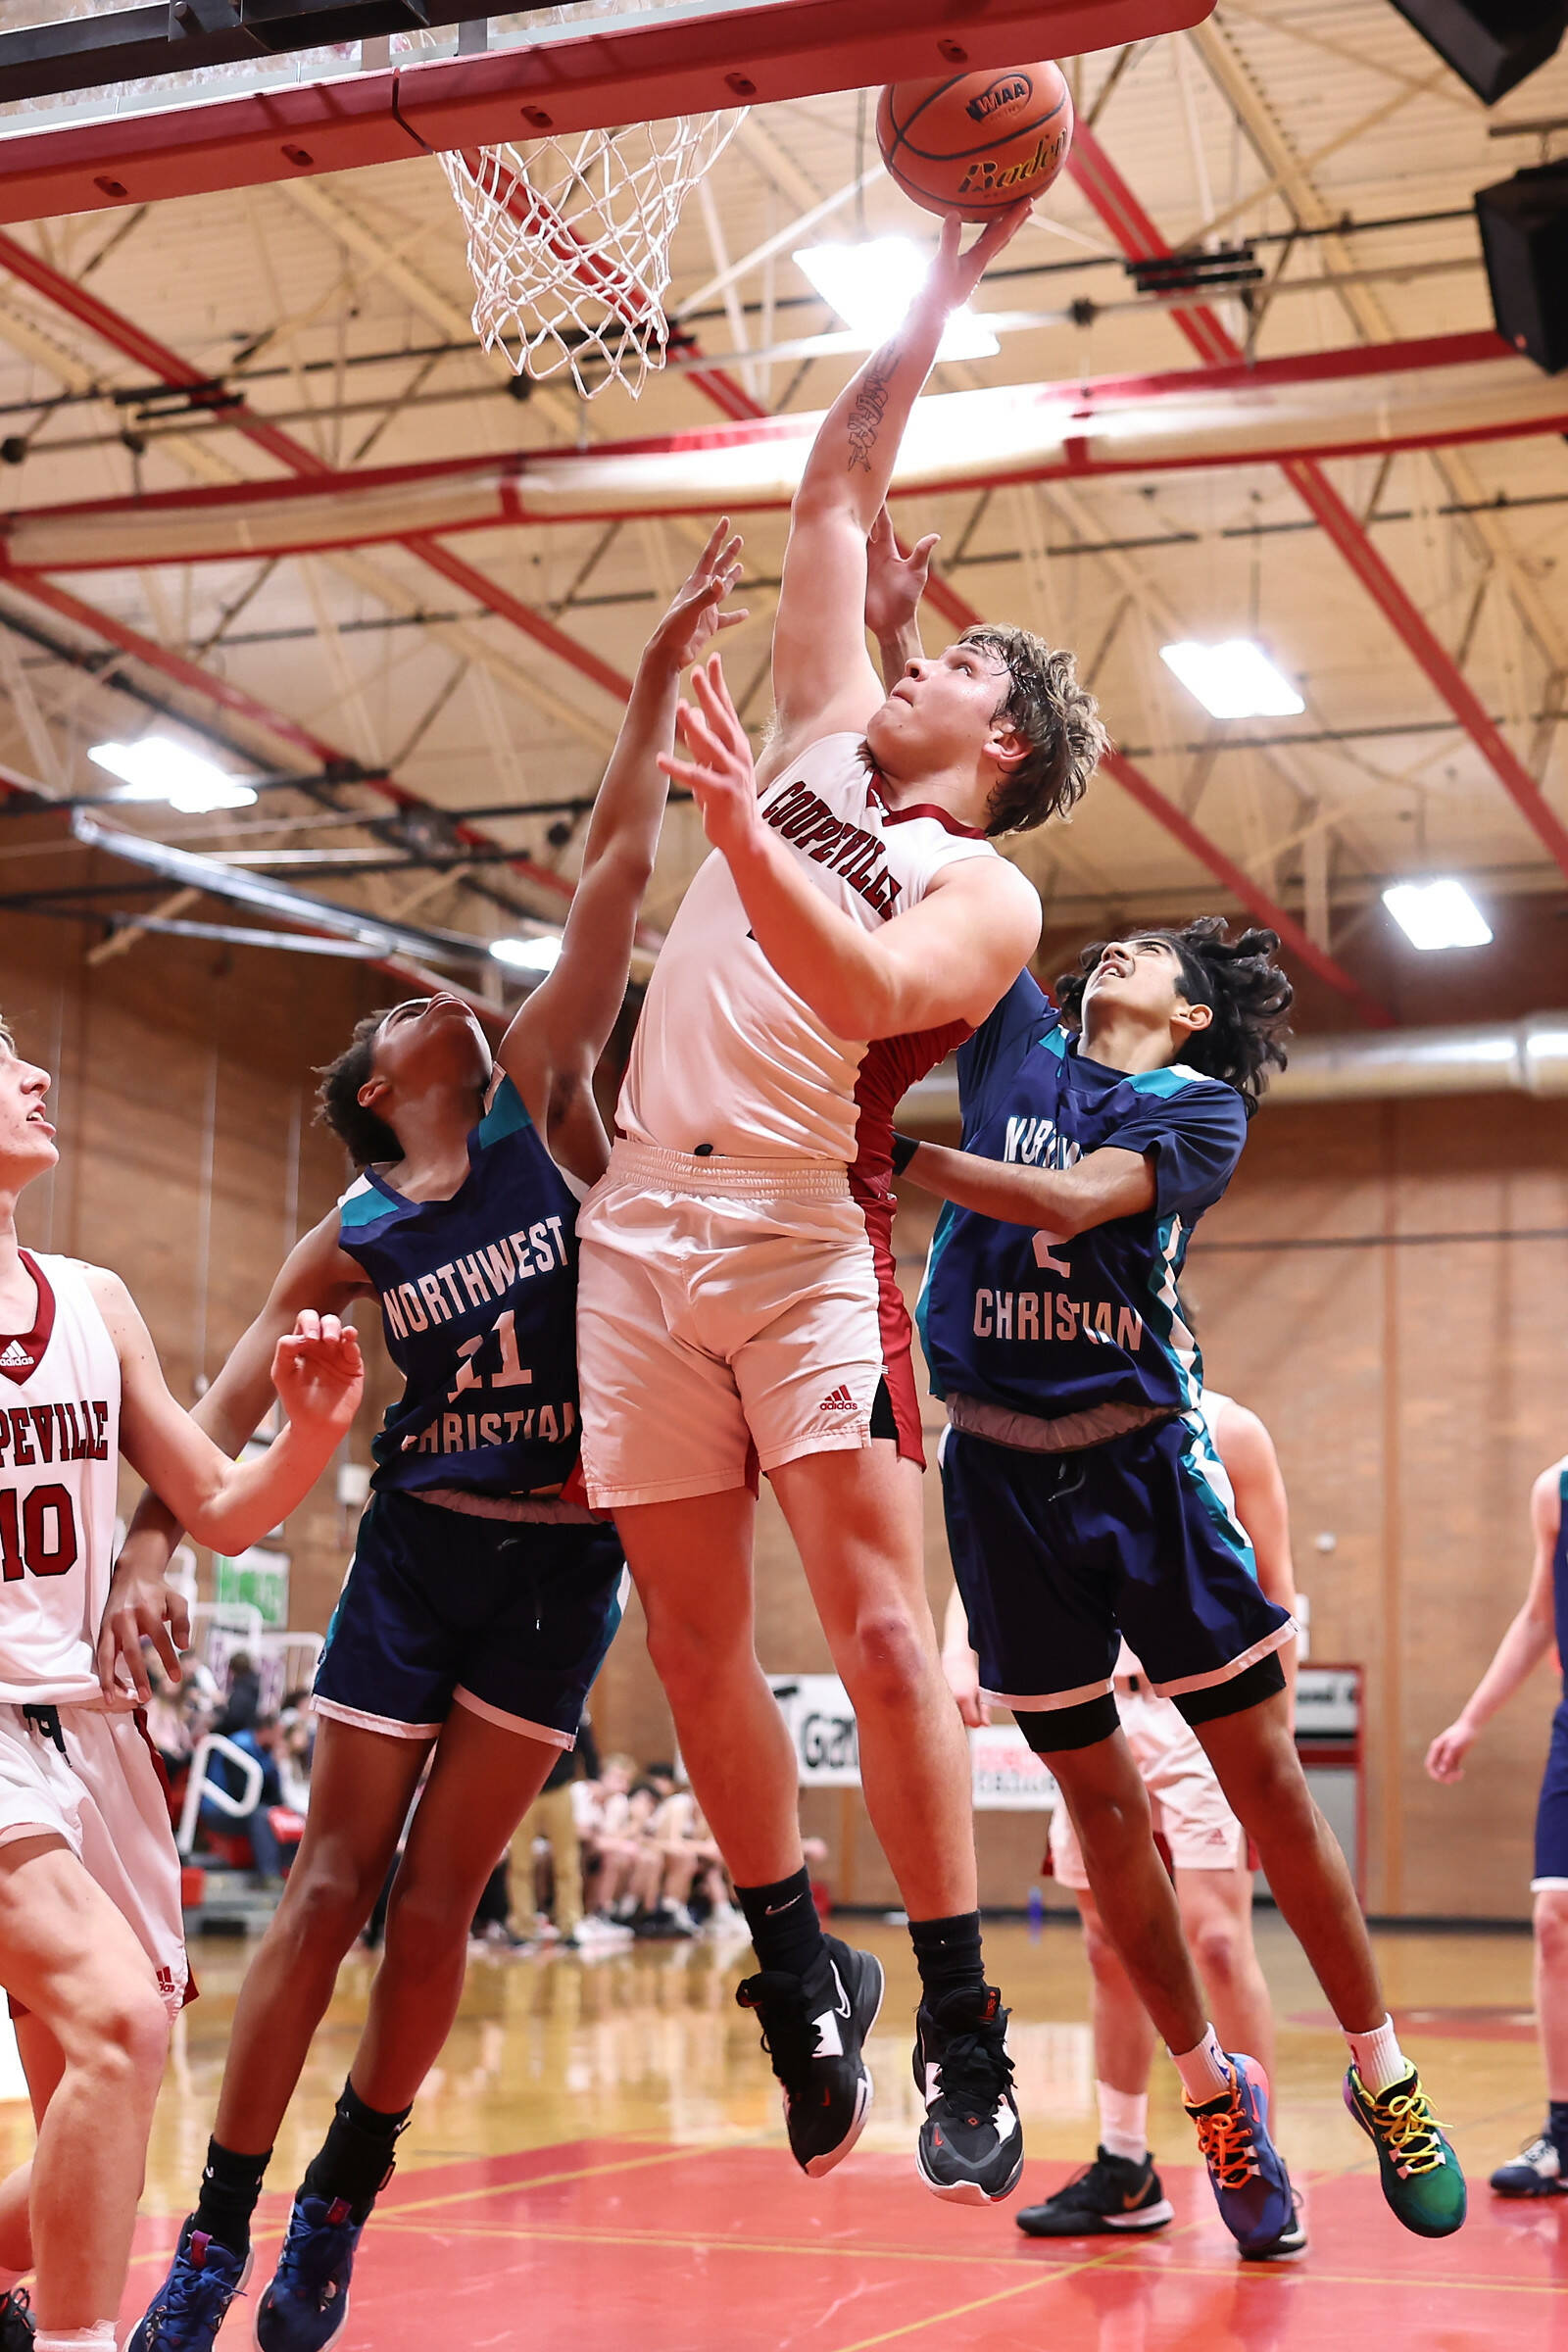 Coupeville High School senior Dominic Coffman takes a shot in a game against Northwest Christian on Tuesday. Coupeville hosted the bi-district tournament this week. For the boys, the tournament is a double elimination event. The Wolves beat Northwest Christian 64-26 Tuesday, then lost to La Conner 63-61 on Thursday. On Saturday, Coupeville will play Auburn Adventist in a winner-to-state, loser-out game. (Photo by John Fisken)